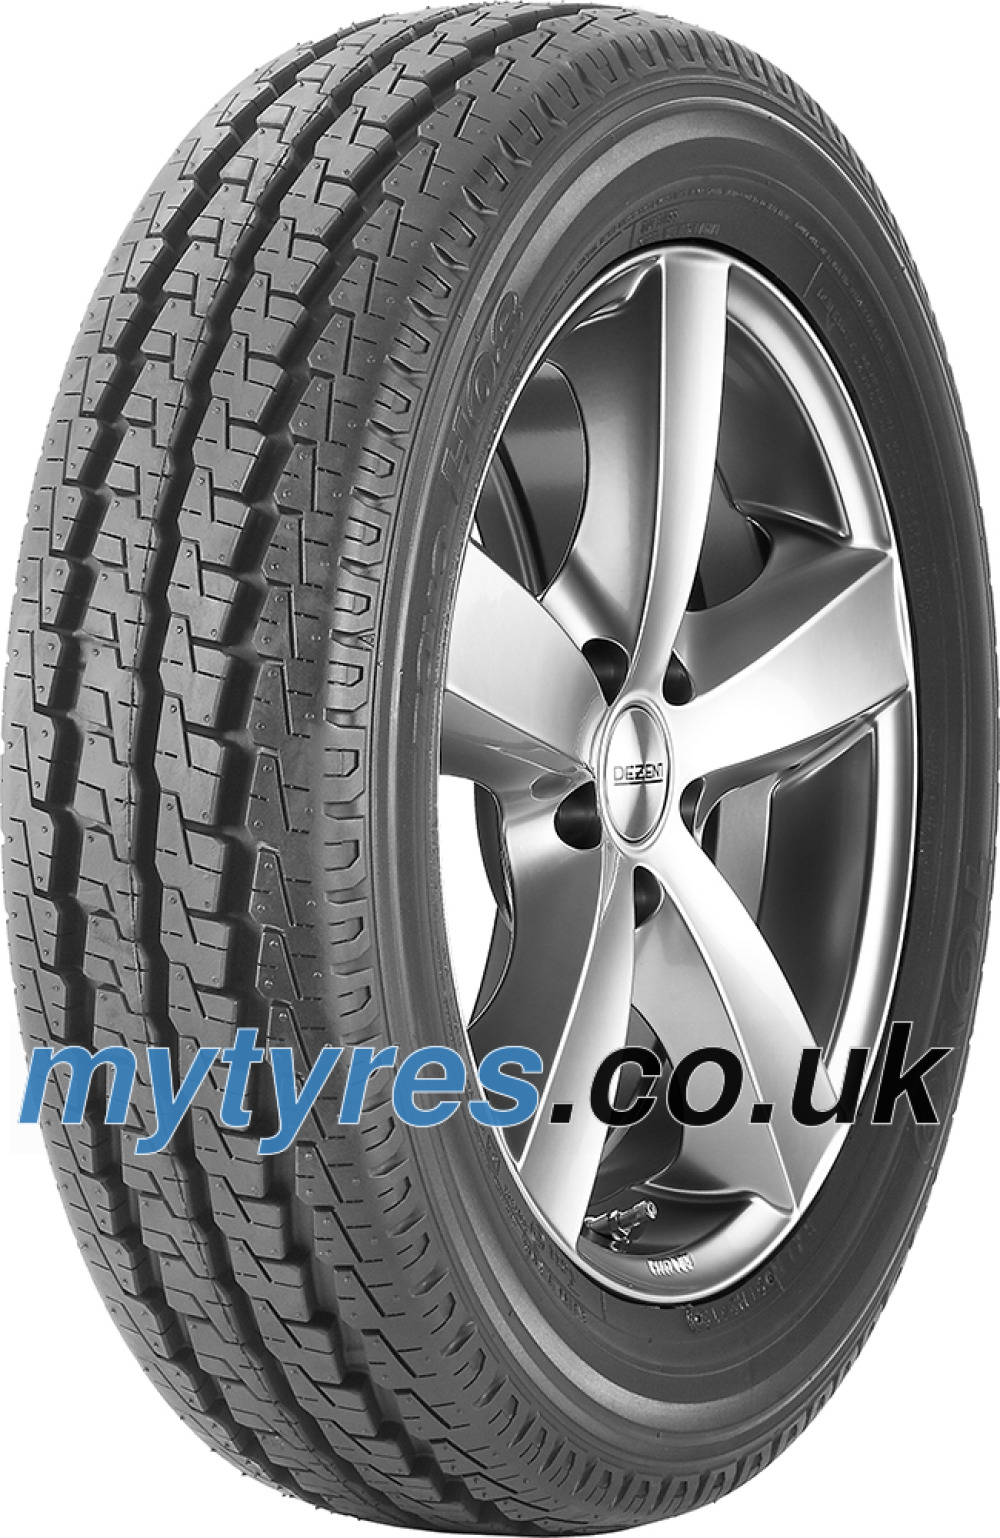 Toyo H 08. Only £ 434.80